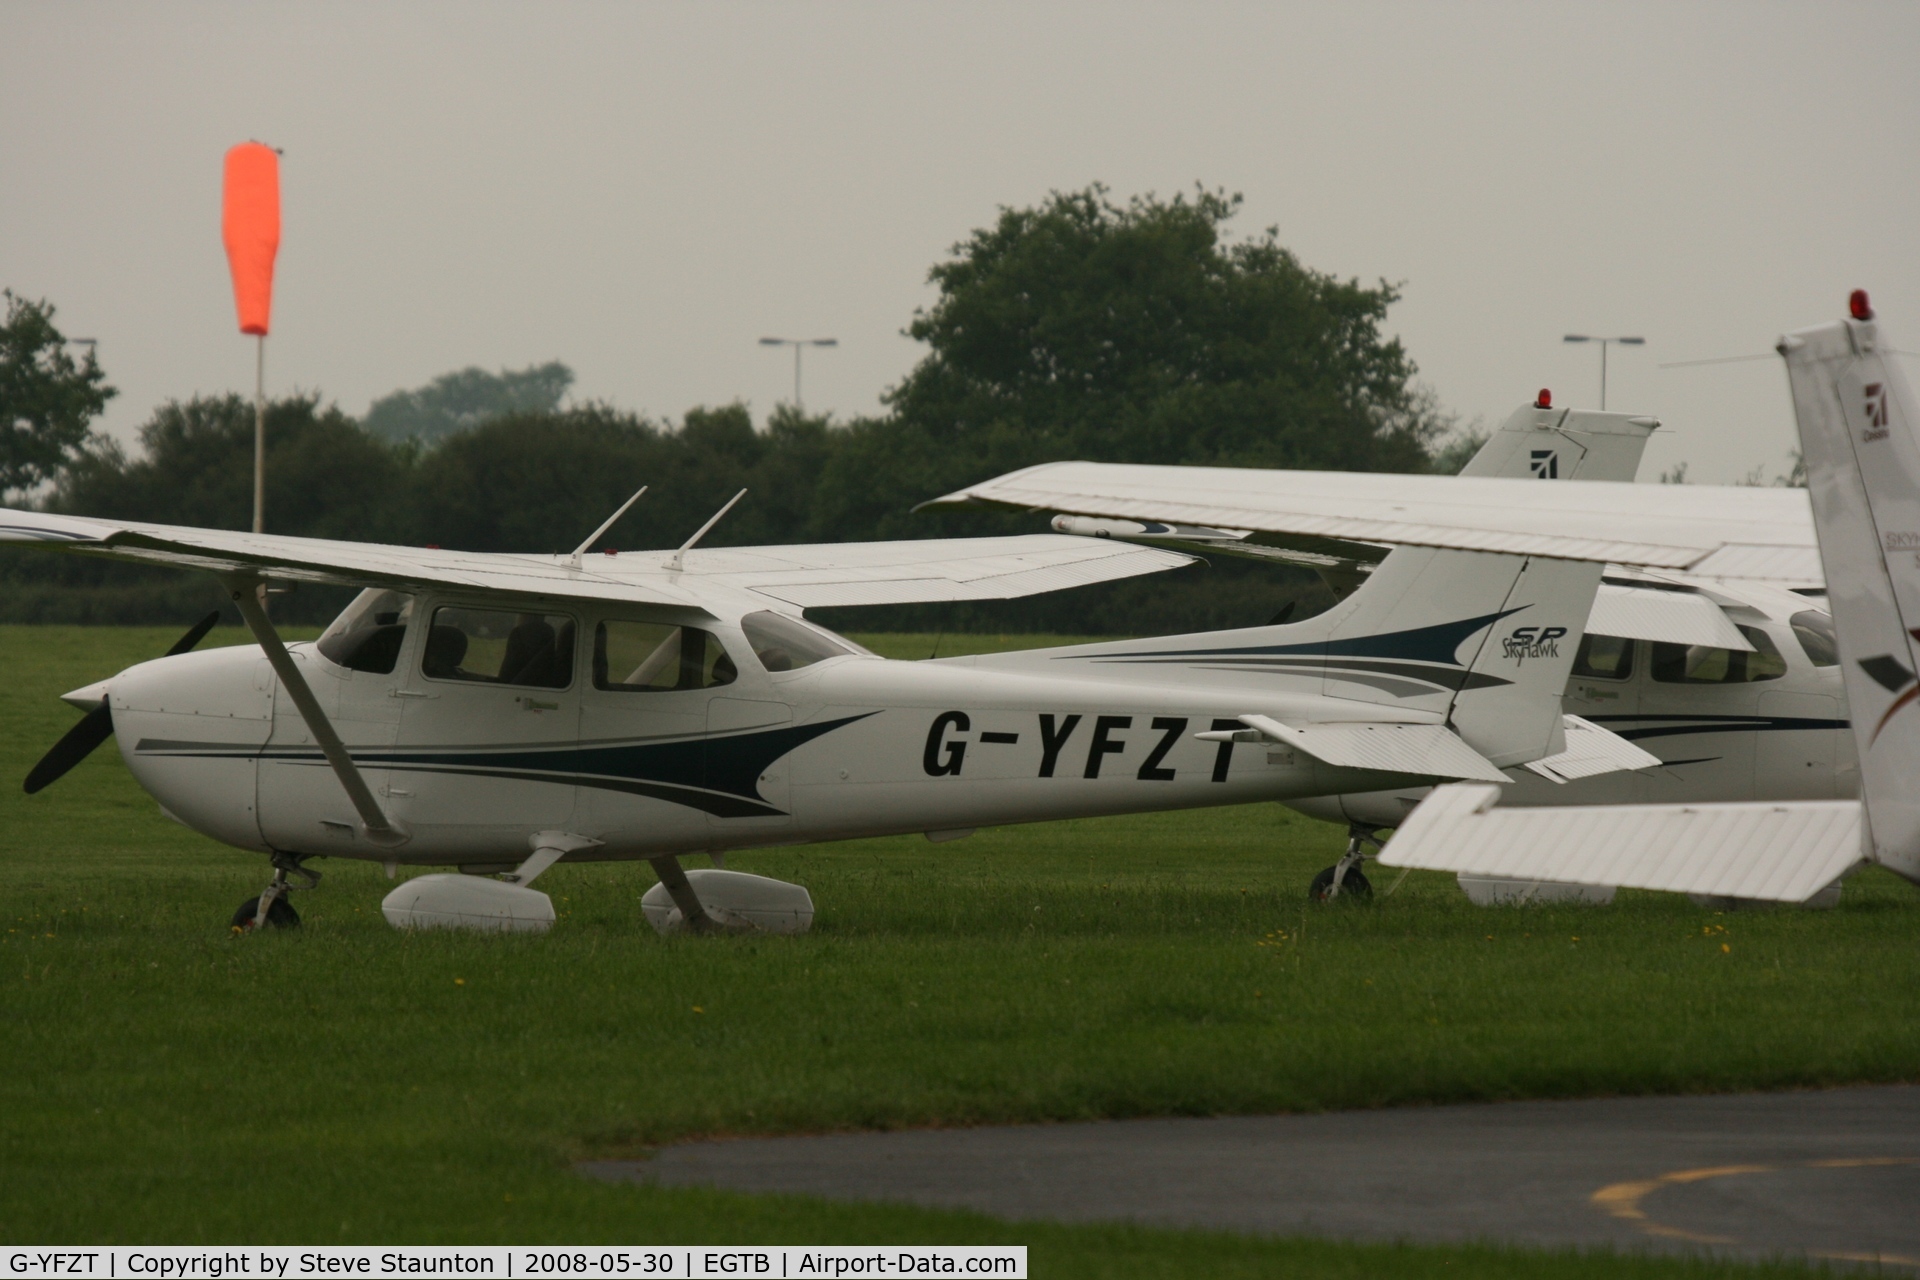 G-YFZT, 2004 Cessna 172S C/N 172S-9587, Taken at Wycombe Air Park using my new Sigma 50 to 500 APO DG HSM lens (The Beast)